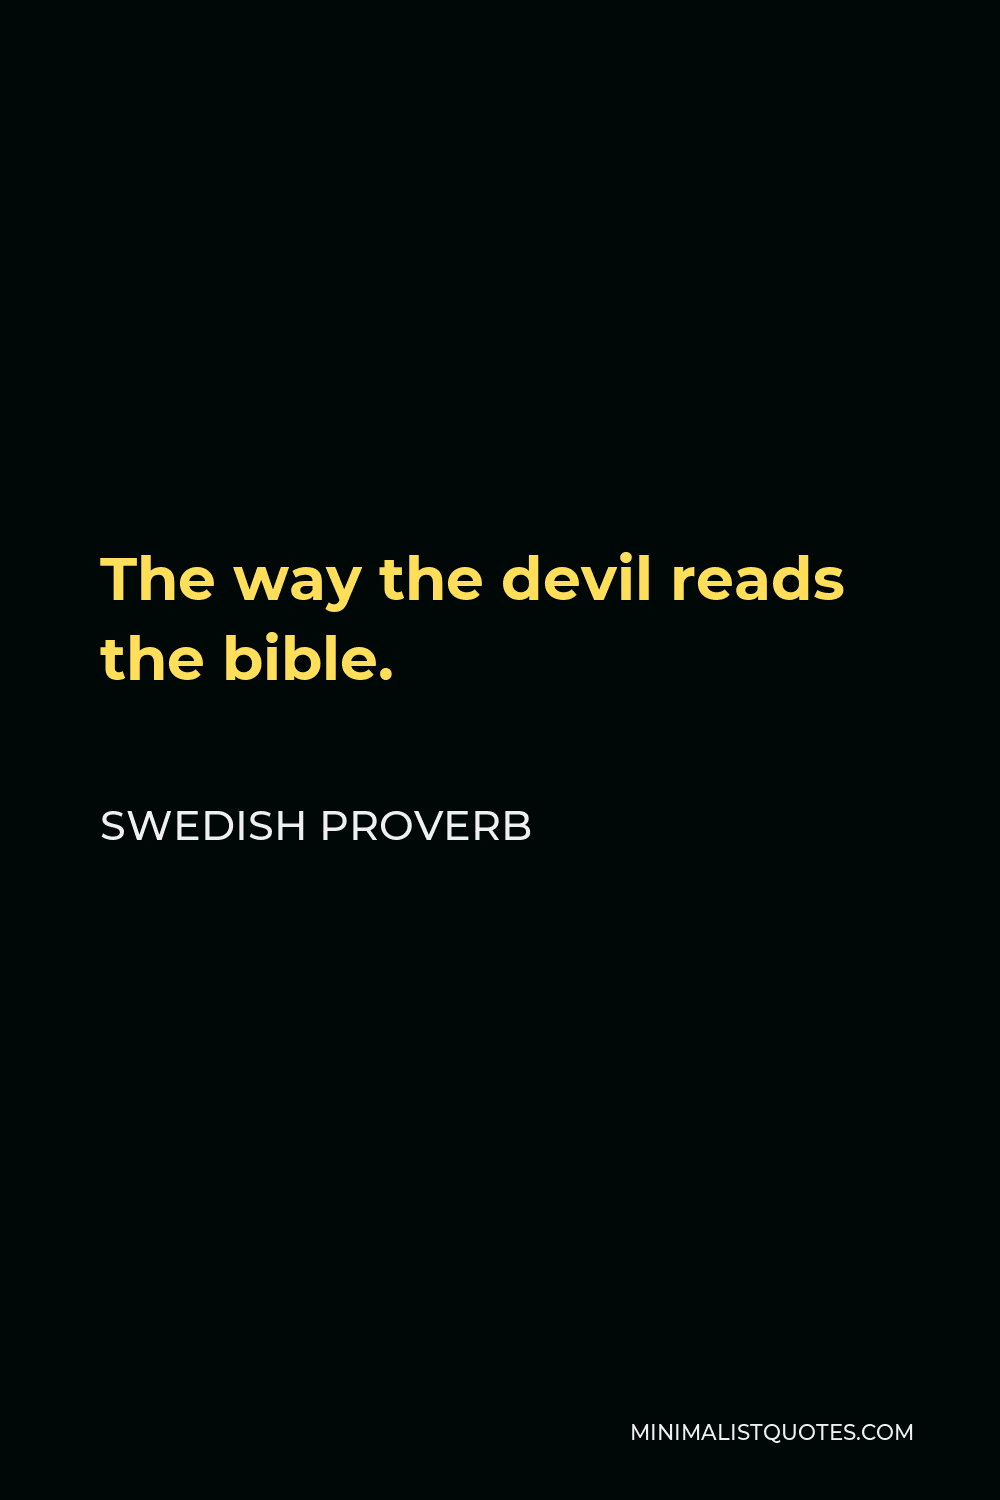 Swedish Proverb Quote - The way the devil reads the bible.